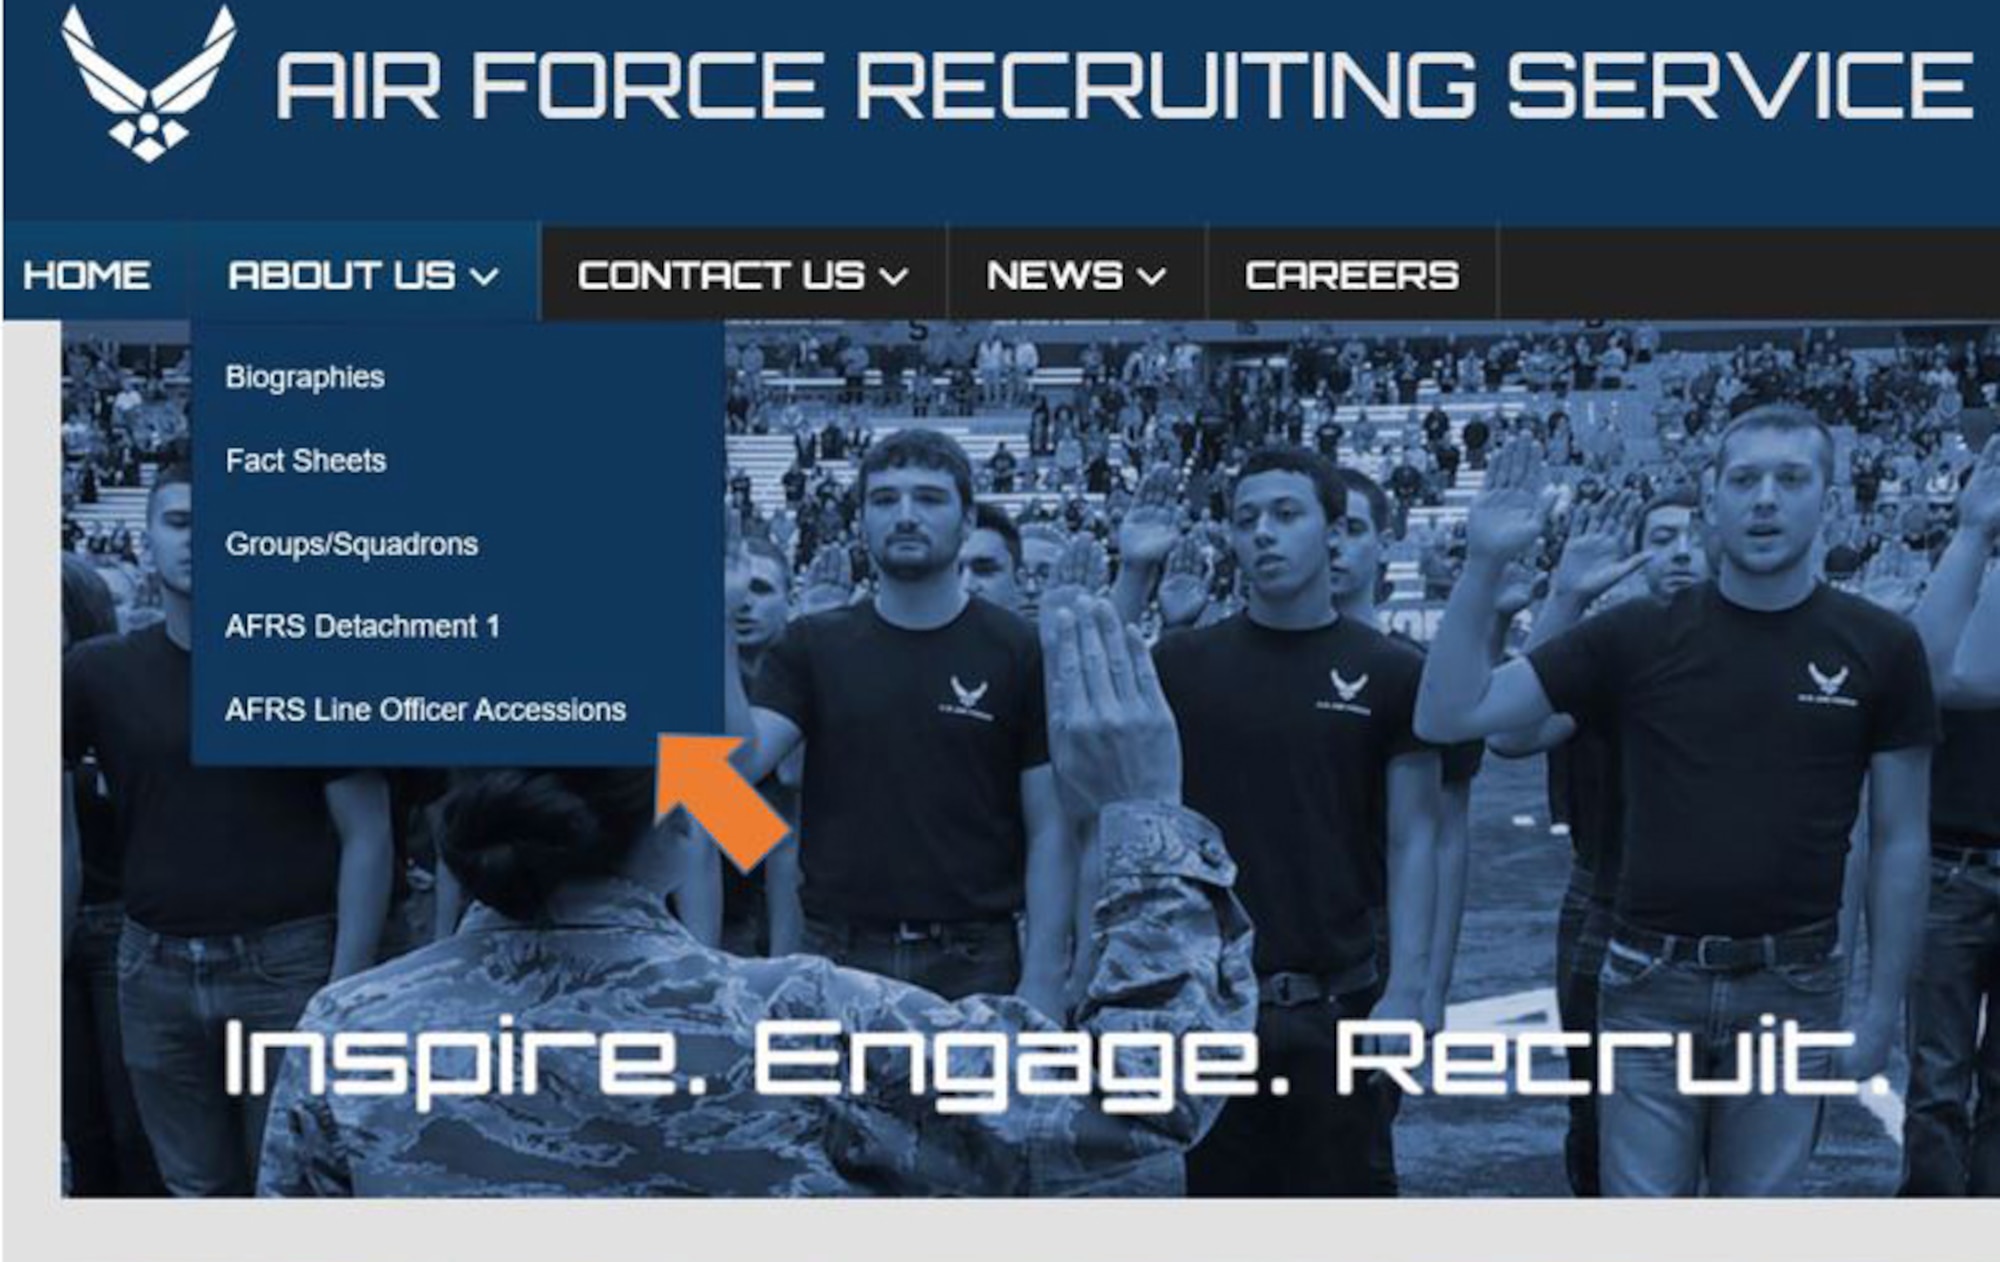 Specialists from Air Force Recruiting Service's line officer accessions program and the AFRS public affairs office teamed up to create a public page on the AFRS website that serves as a one-stop shop for line officer accession information.